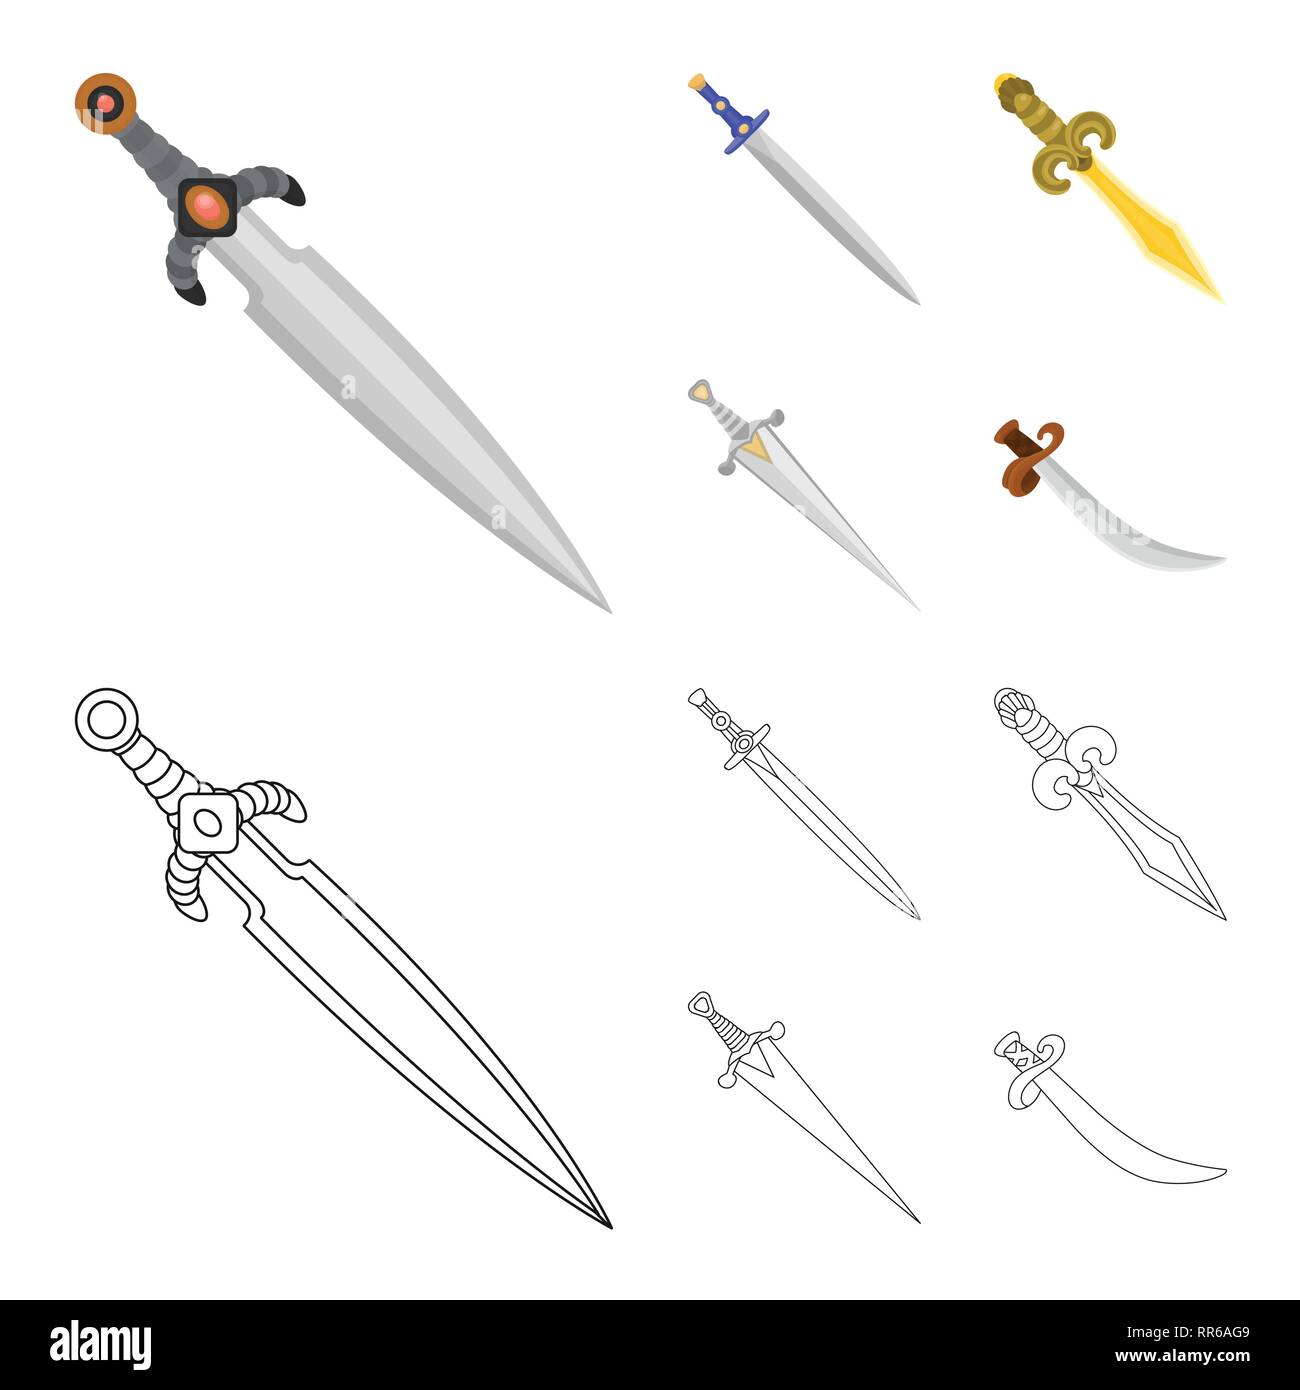 Spanish,longsword,power,battle,handle,hilt,scimitar,conqueror,decoration,pirate,steel,star,gold,silver,copper,murder,ornament,stone,warrior,soldier,ruby,military,fantasy,game,armor,sharp,blade,sword,dagger,knife,weapon,saber,medieval,set,vector,icon,illustration,isolated,collection,design,element,graphic,sign Vector Vectors , Stock Vector